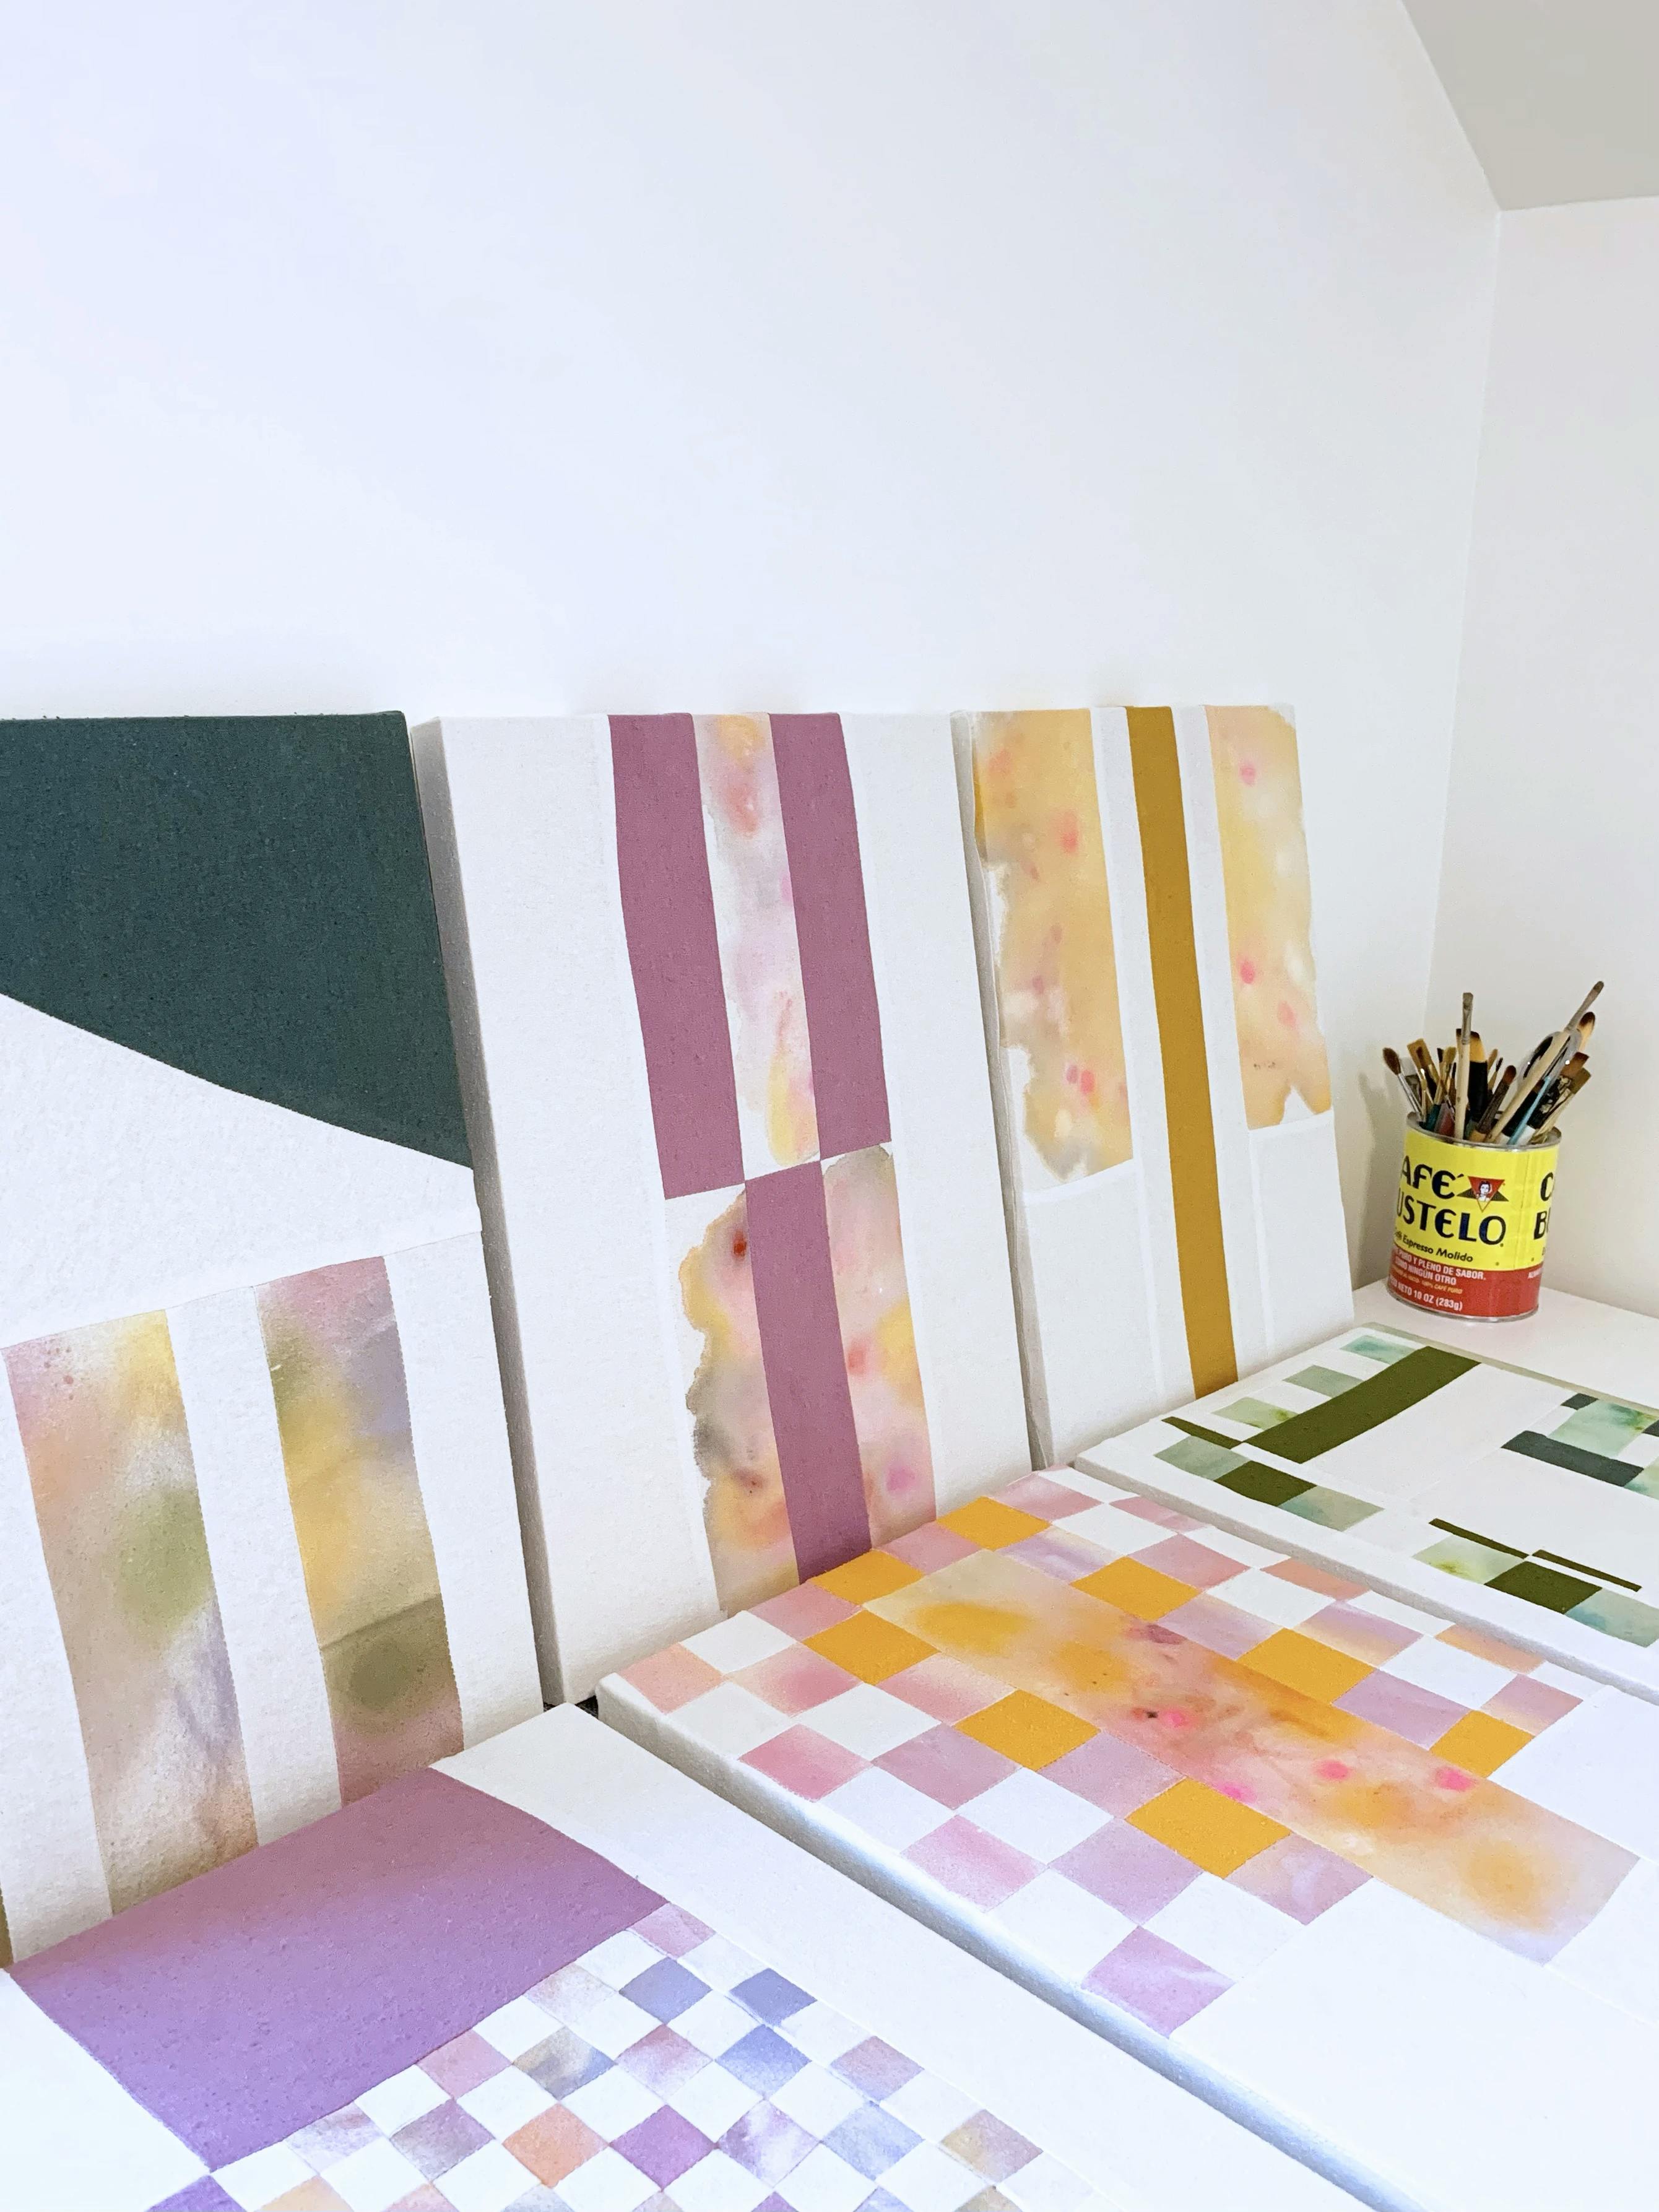 Patchwork pieces with colorful gradients and checkered patterns by artist Anastasia Greer in her studio.